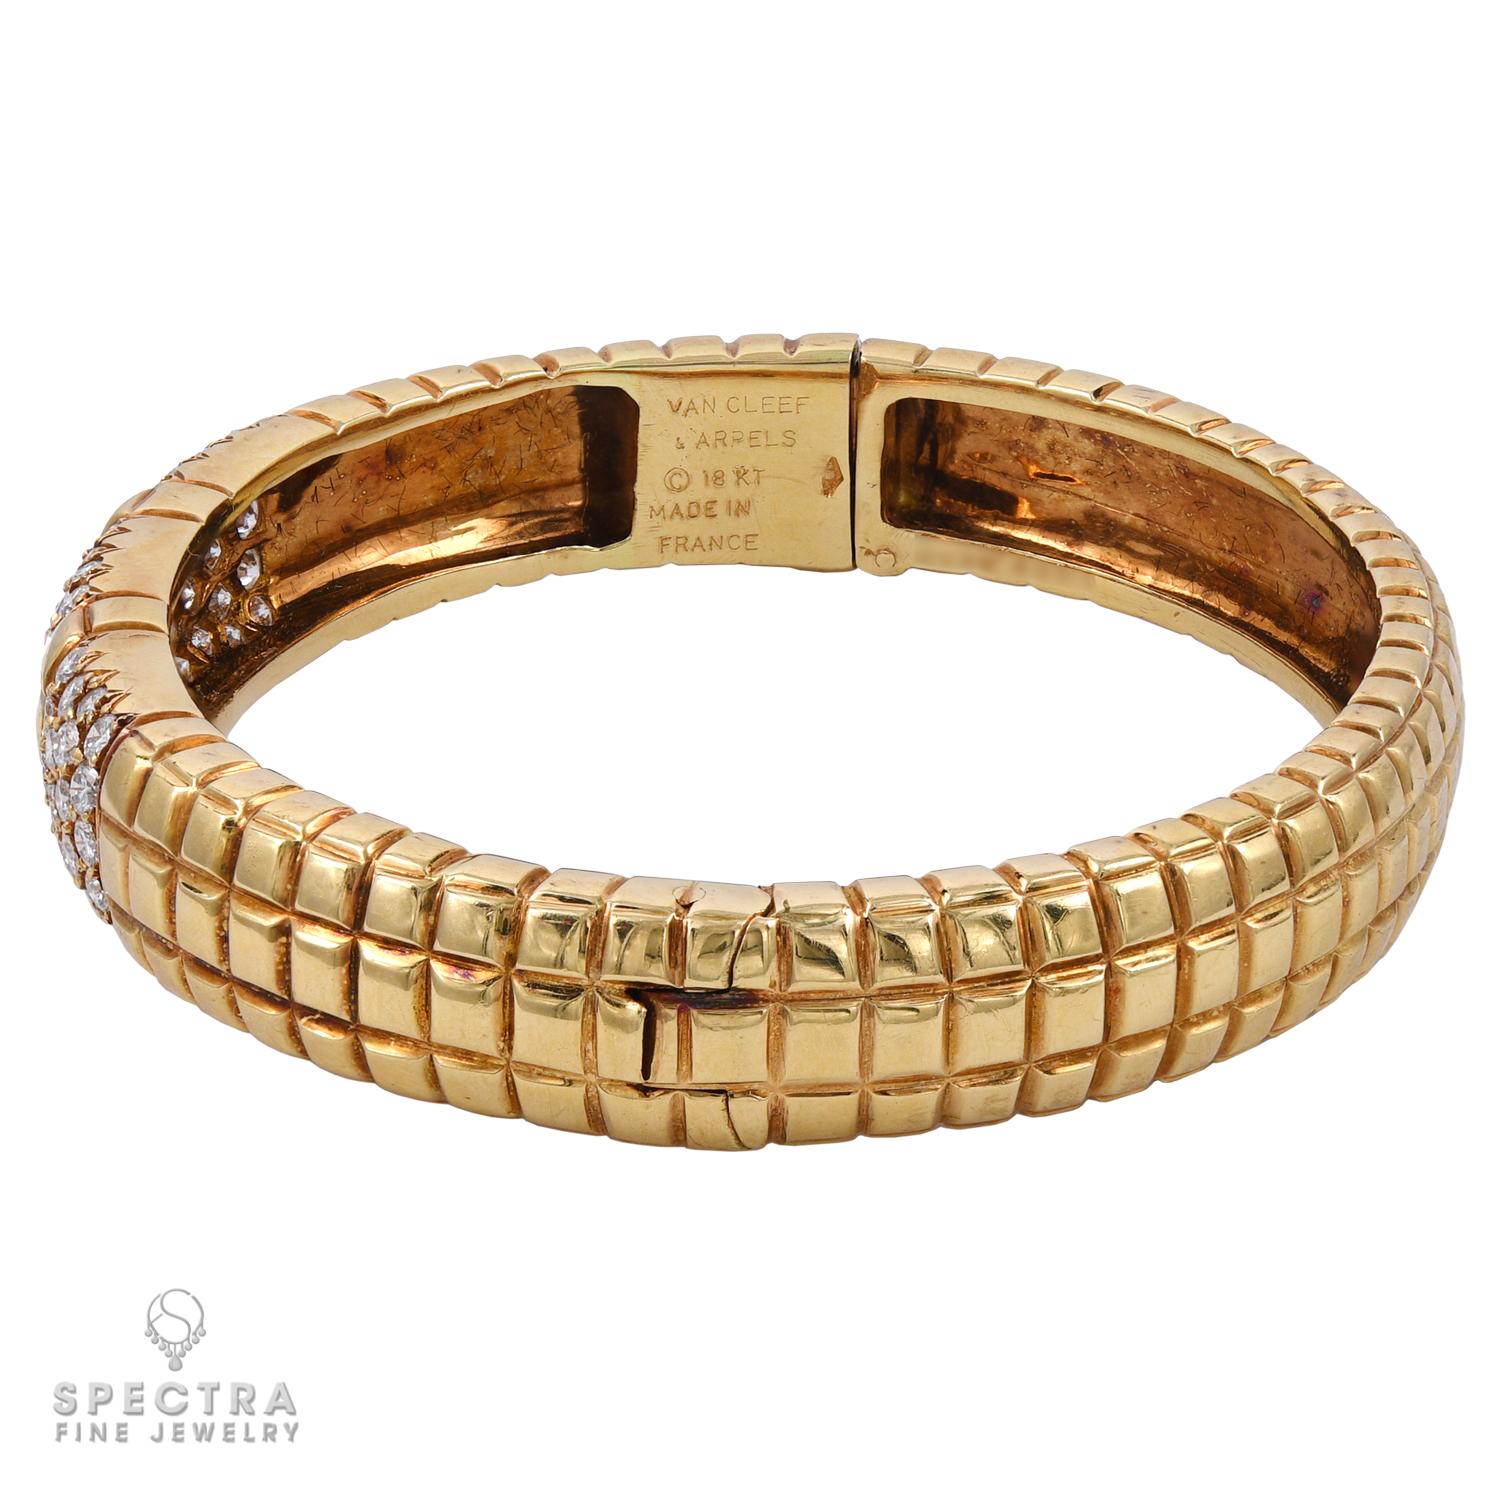 Textured gold and diamonds are arranged into two distinct geometric patterns adorning the full graceful arc of this Van Cleef & Arpels Vintage Gold Diamond Bangle Bracelet, made in France in the 20th century, circa 1970s. The bracelet is crafted in